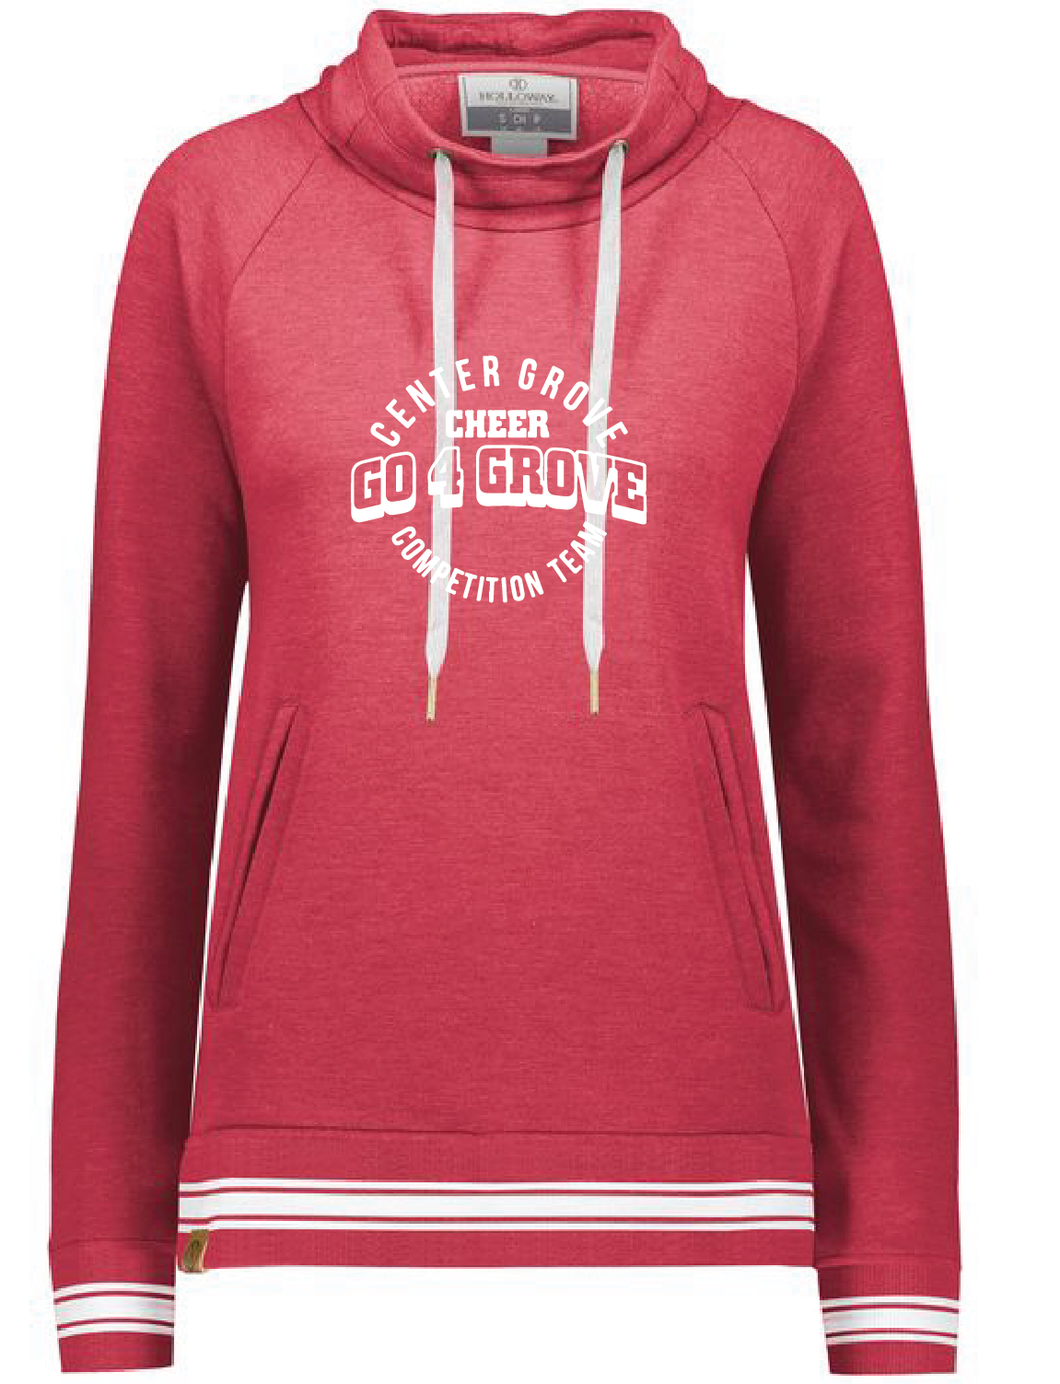 Ladies Ivy League Funnel Neck Pullover / Red / Center Grove Comp Cheer Team